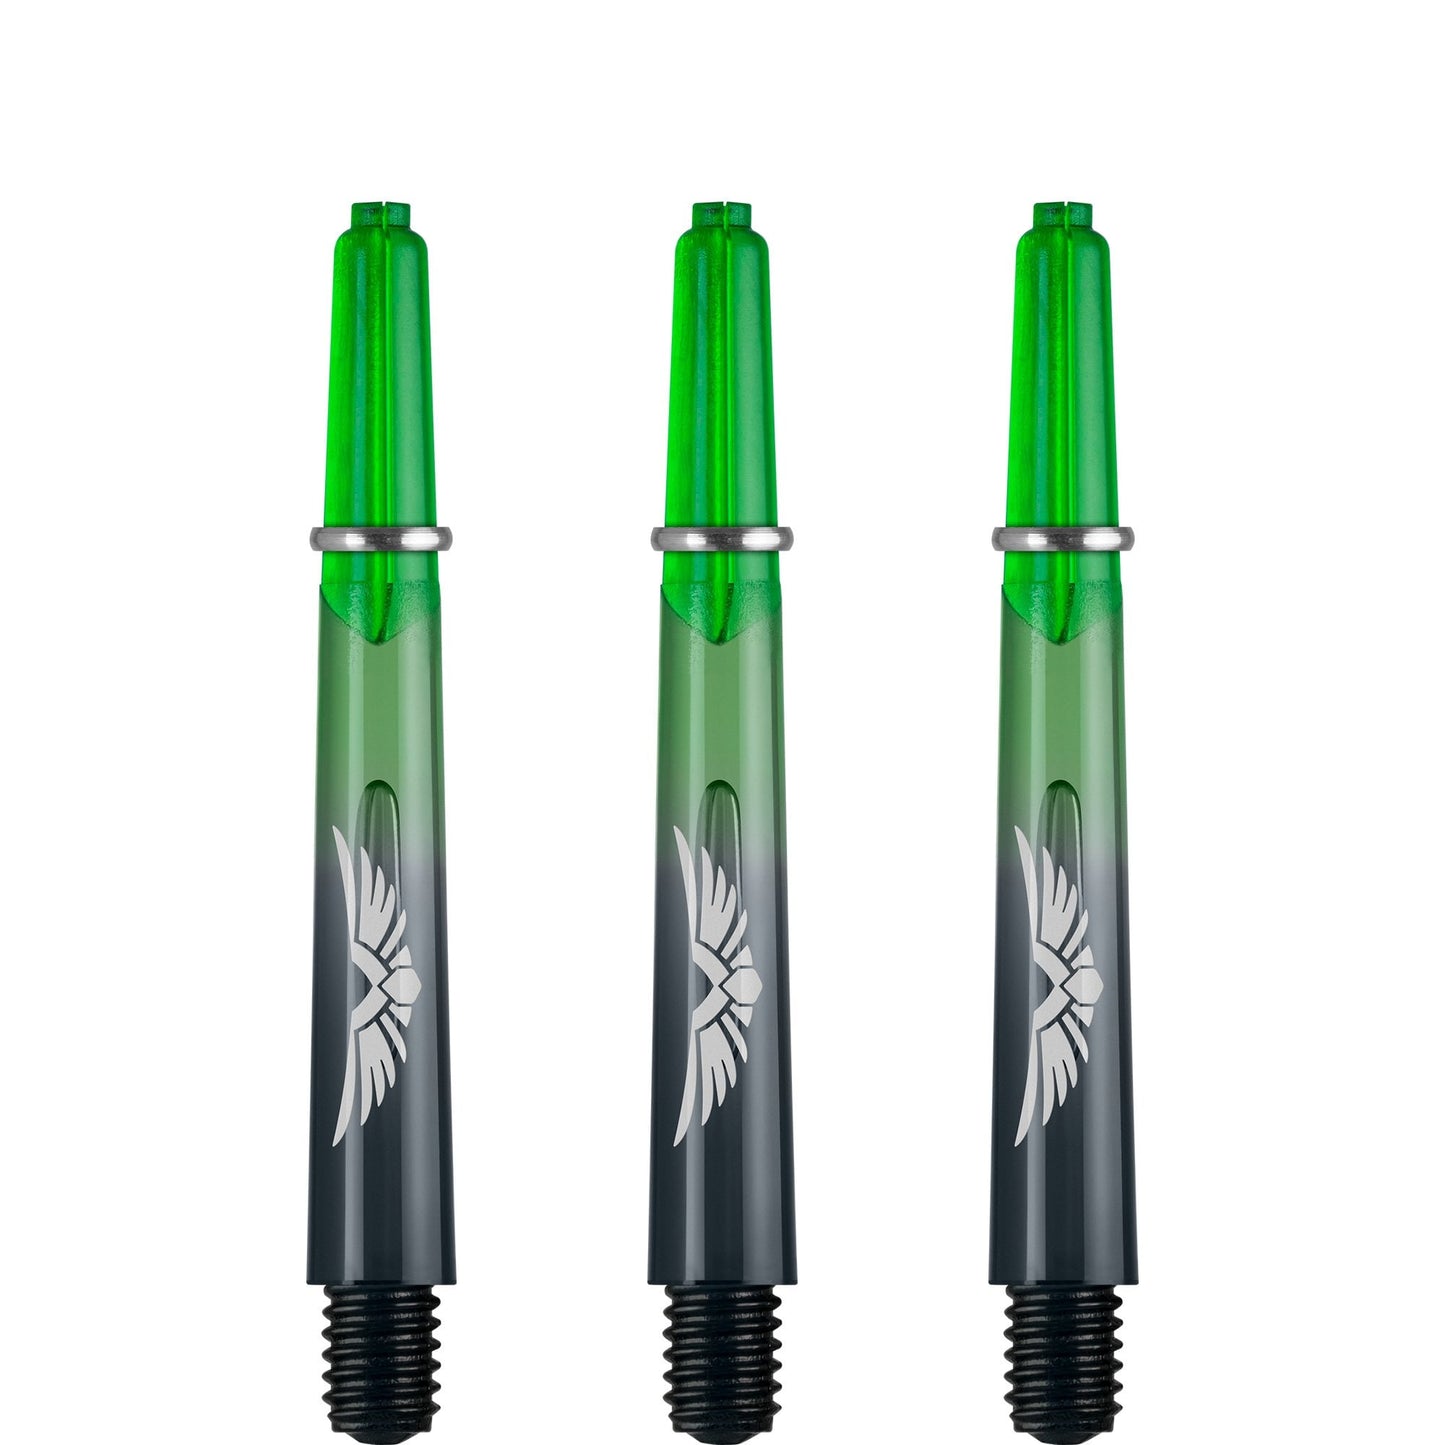 Shot Eagle Claw Dart Shafts - with Machined Rings - Strong Polycarbonate Stems - Black Green Tweenie